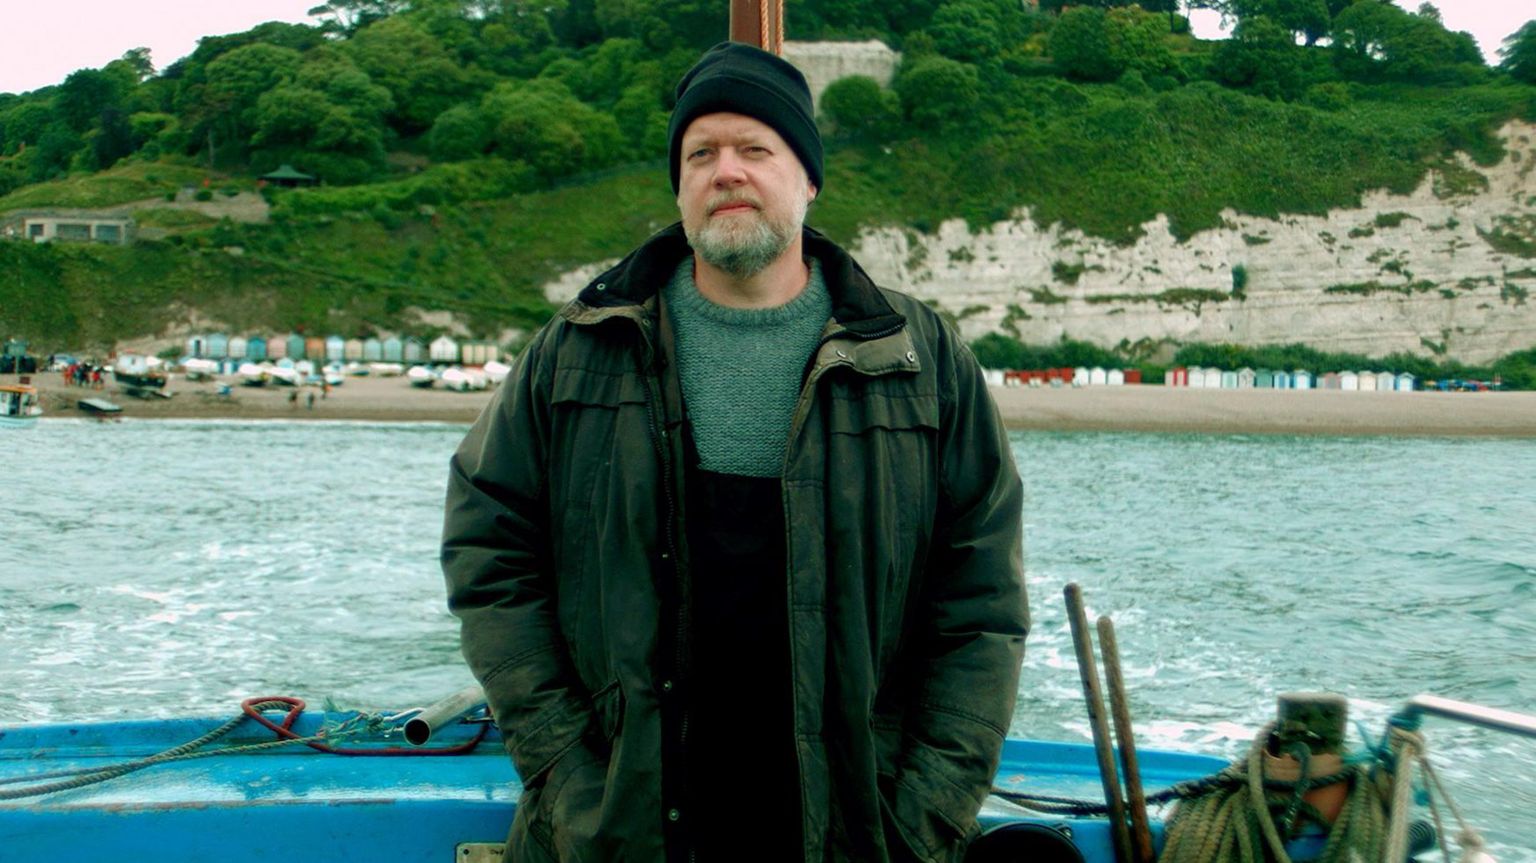 Photo of Paul Breen in character as a fisherman on a boat with the sea and a beach in the background.